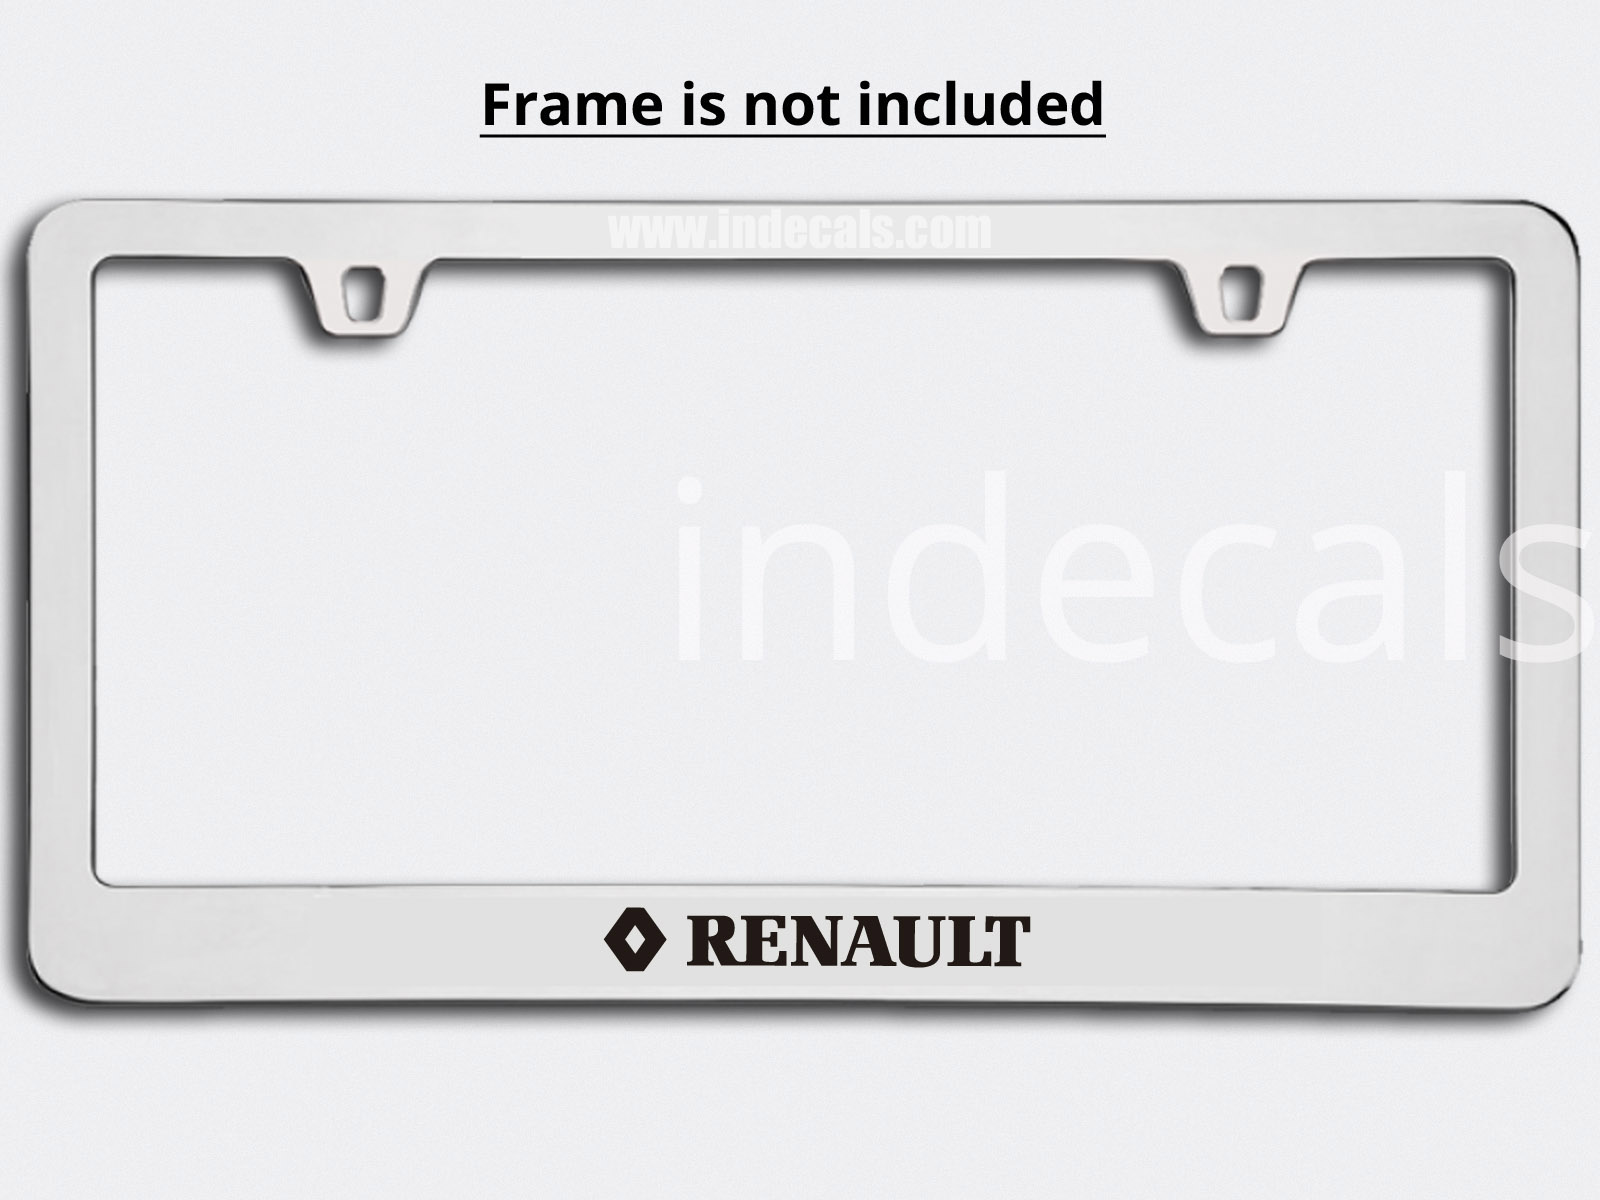 3 x Renault Stickers for Plate Frame - Black